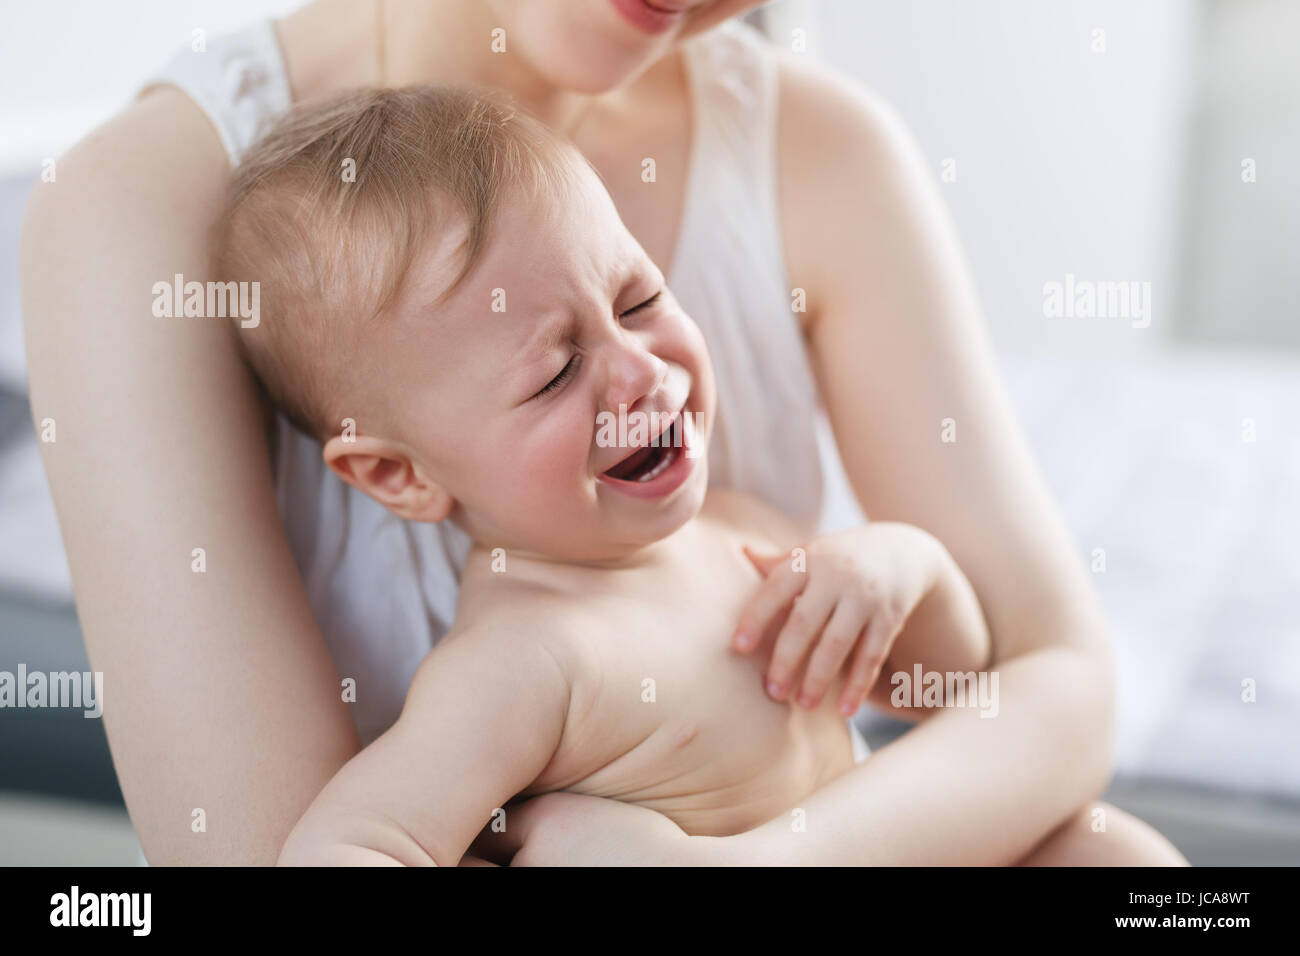 Young woman with crying baby on hands. Bright white colors. Stock Photo